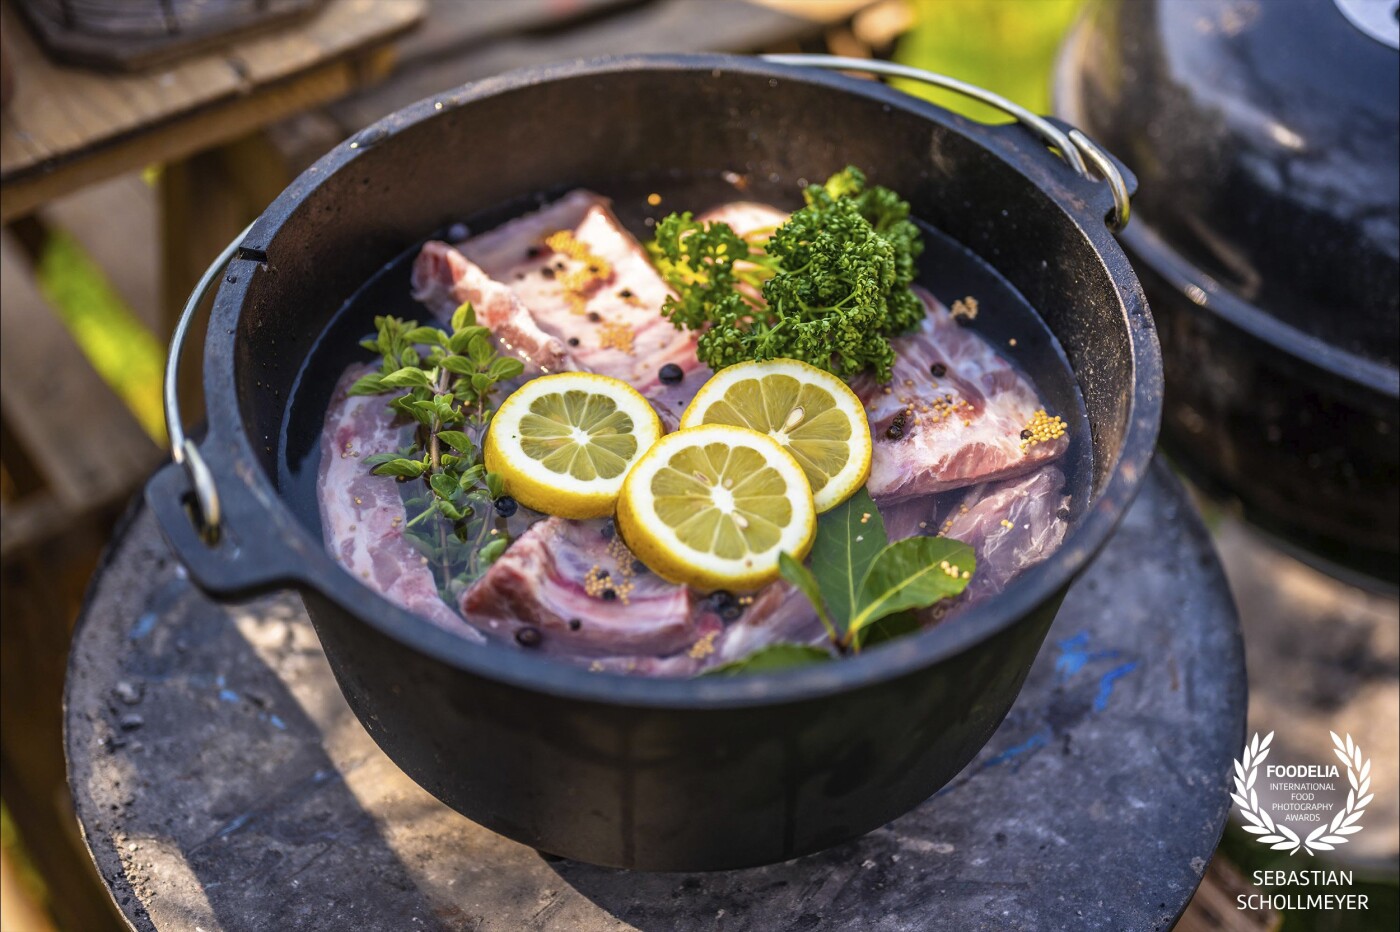 Preparing baby back ribs in a Dutch Oven to put them later on the grill. They will be cooked for 2-3 hours with a lot of spices and some lemon slices.